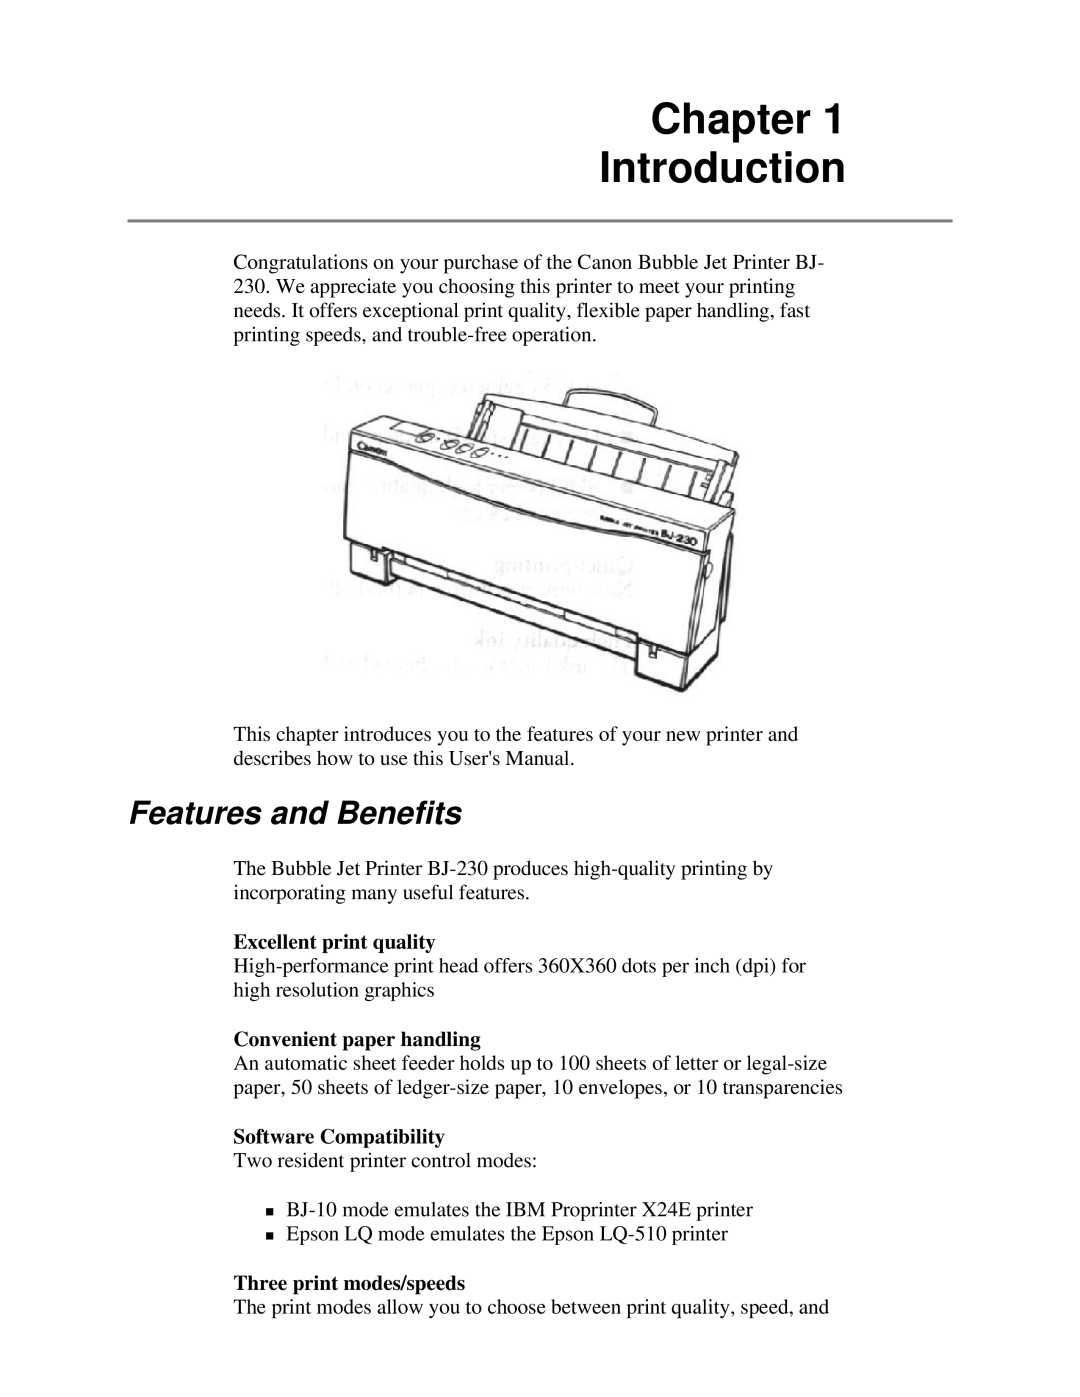 Canon BJ-230 user manual Chapter Introduction, Features and Benefits, Excellent print quality, Convenient paper handling 